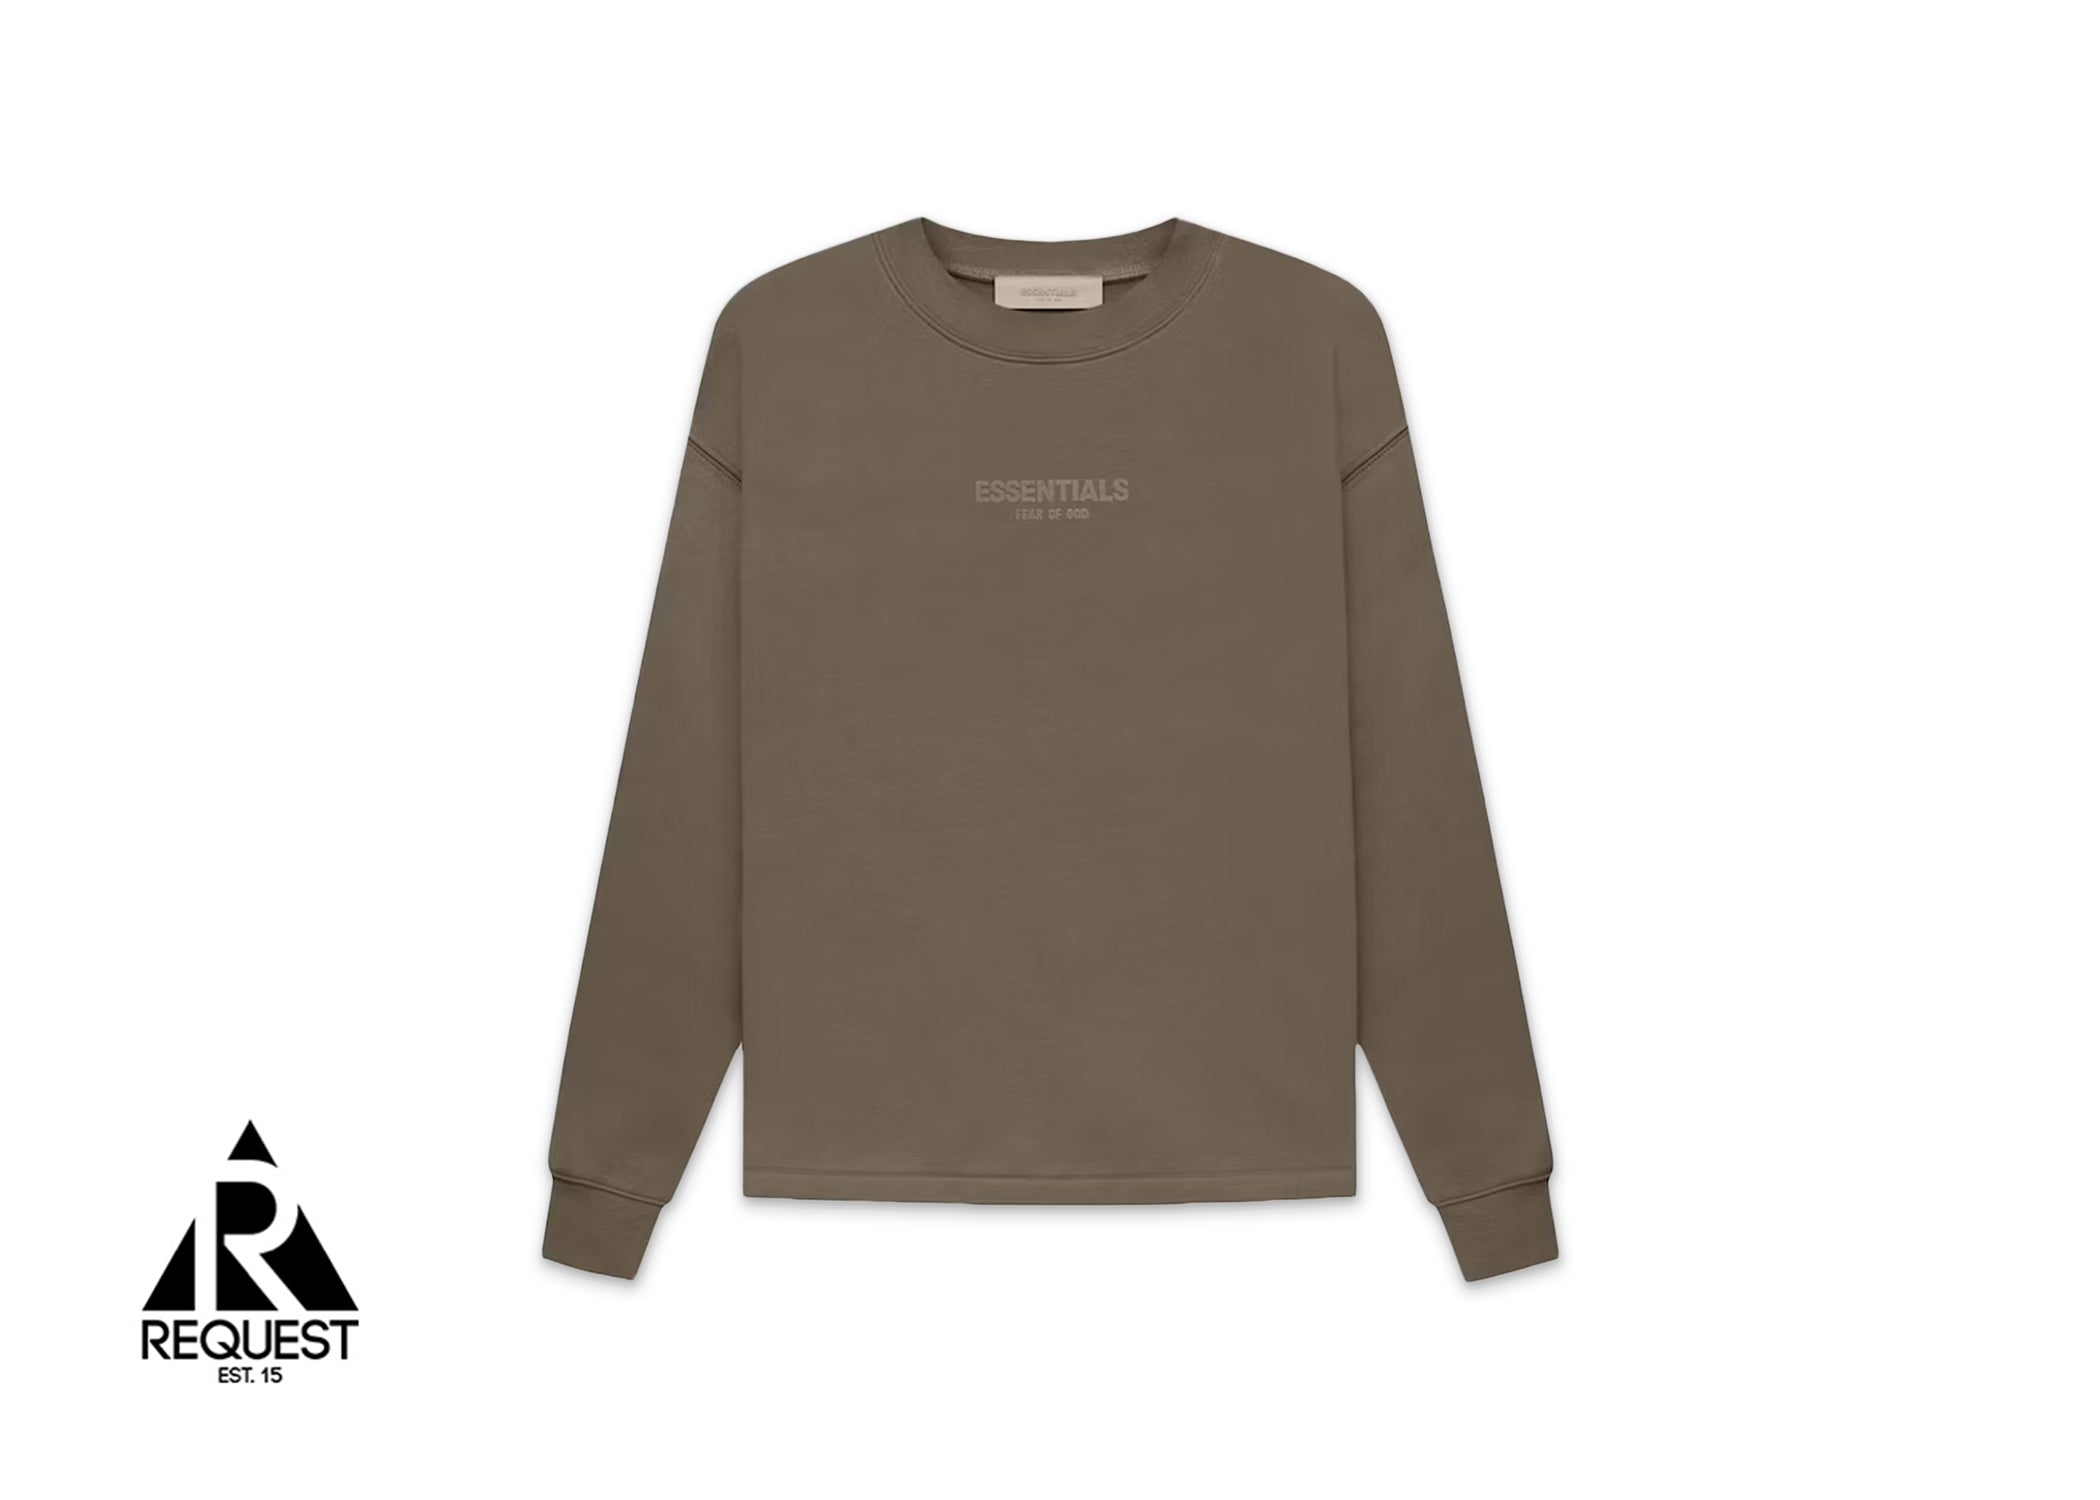 Fear of God Essentials Relaxed Crewneck “Wood”